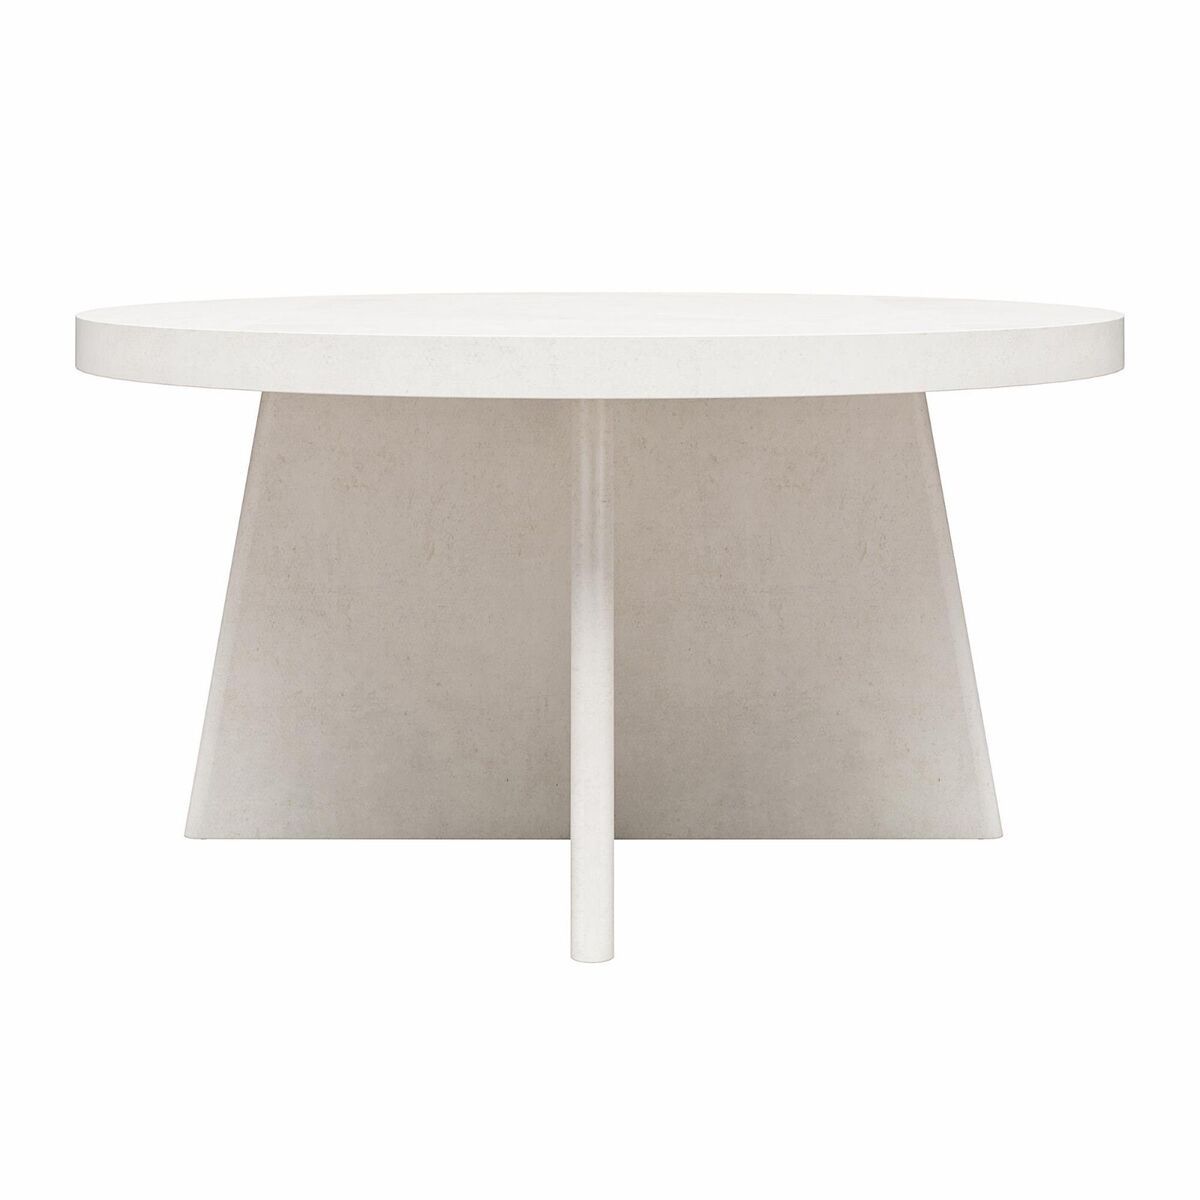 Liam Round Coffee Table, Plaster Intertwines Crisp Minimalism With Earthy  Warmth | Ebay Inside Liam Round Plaster Coffee Tables (View 5 of 15)